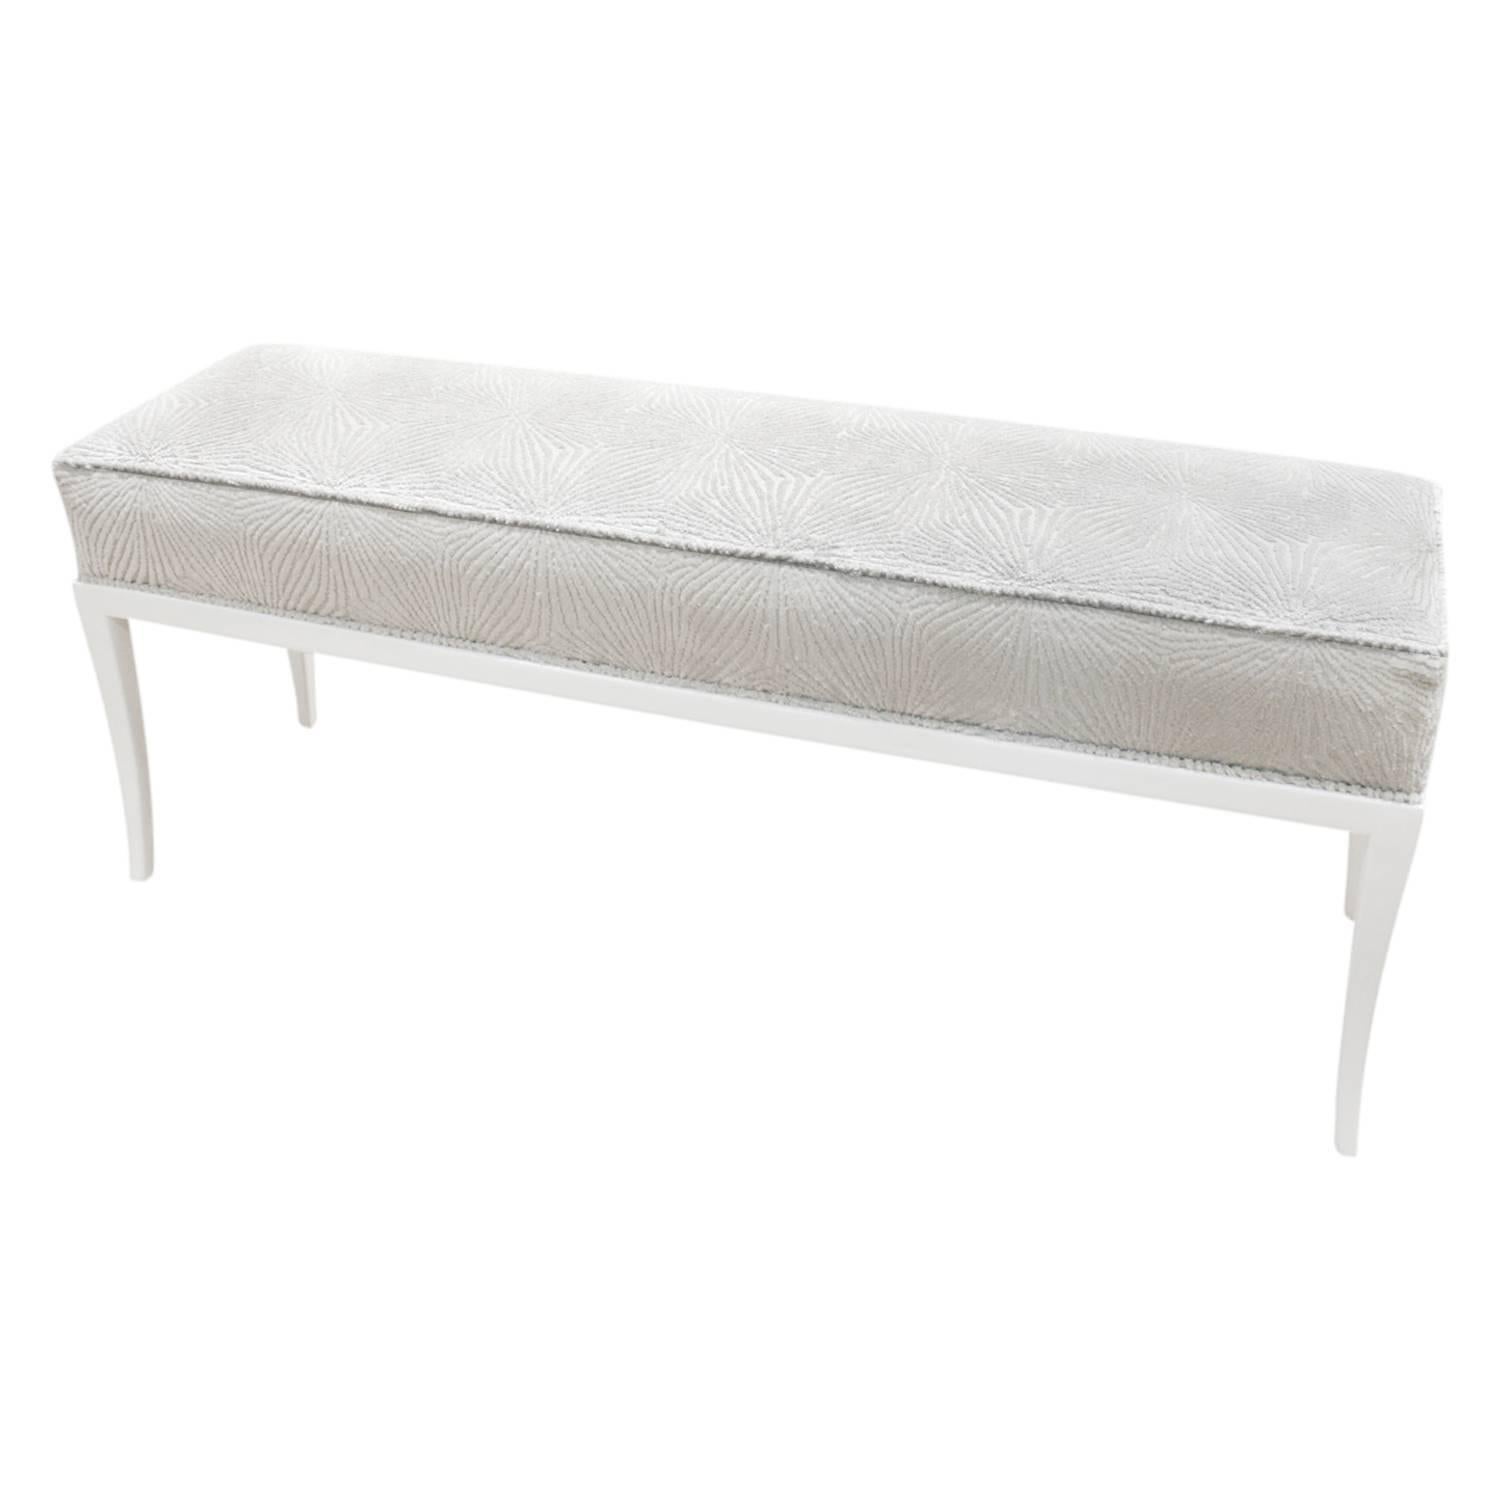 Elegant bench no. 313, white lacquered mahogany base with tapering legs and upholstered seat, by Tommi Parzinger for Parzinger Originals, American 1950s. This is newly upholstered by Lobel Modern.